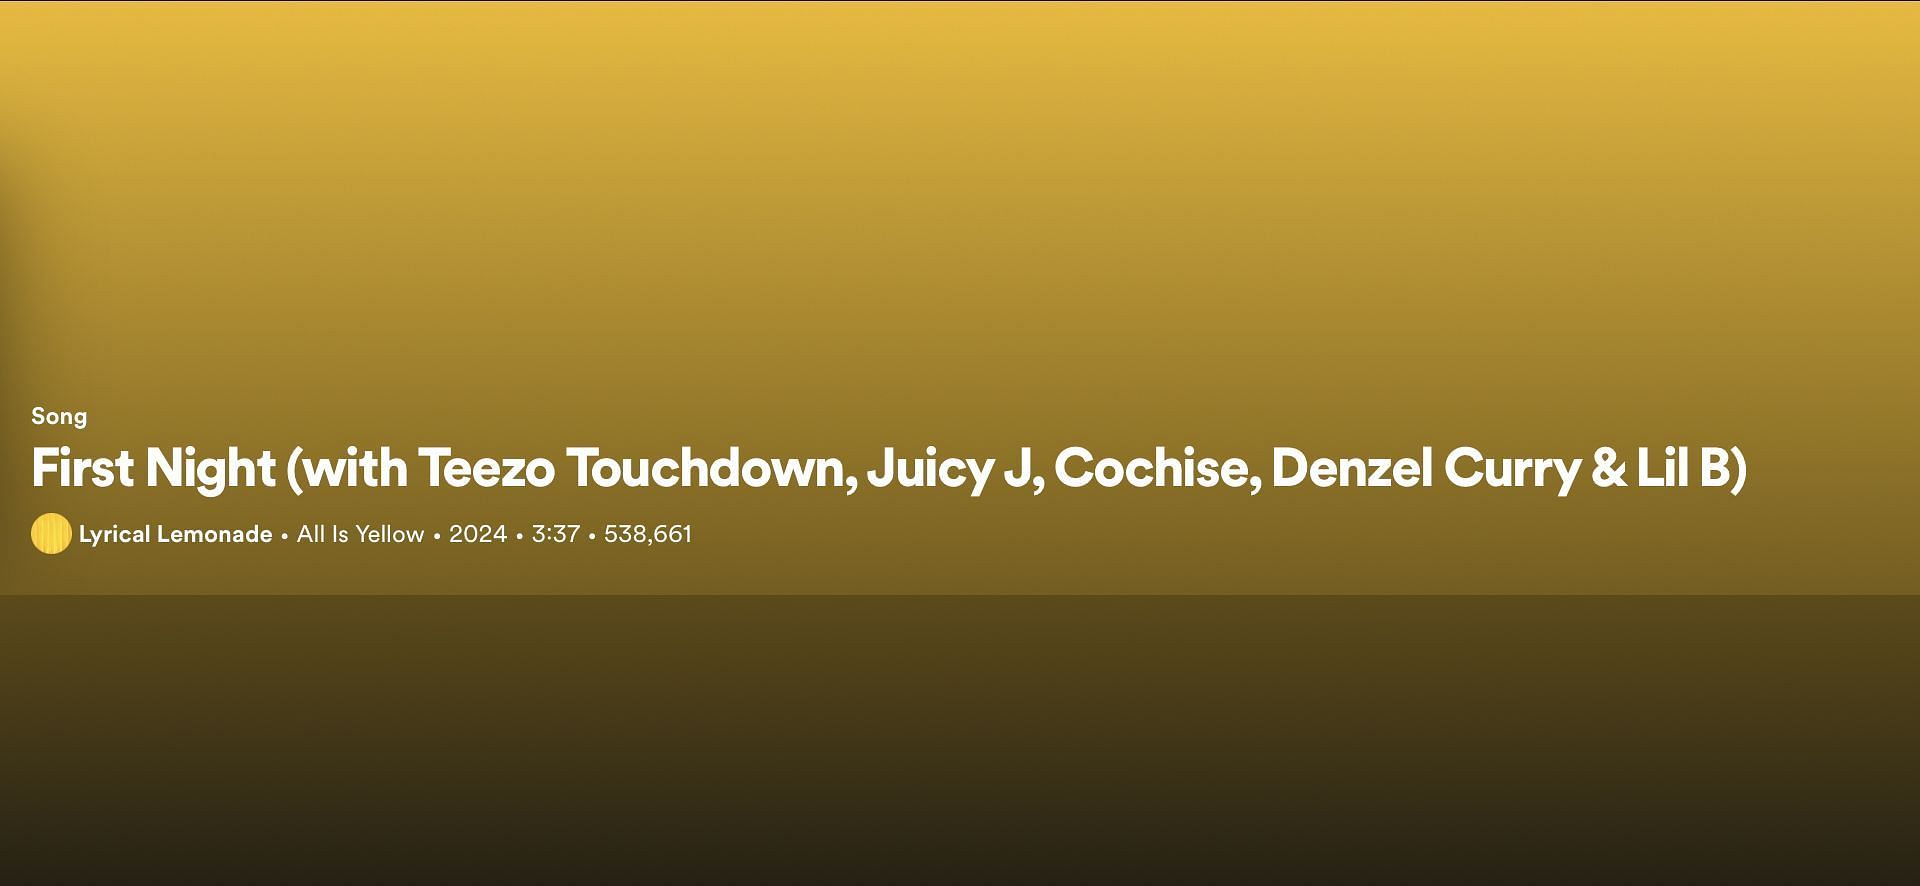 Track 5 from Lyrical Lemonade&#039;s All Is Yellow (Image via Spotify)